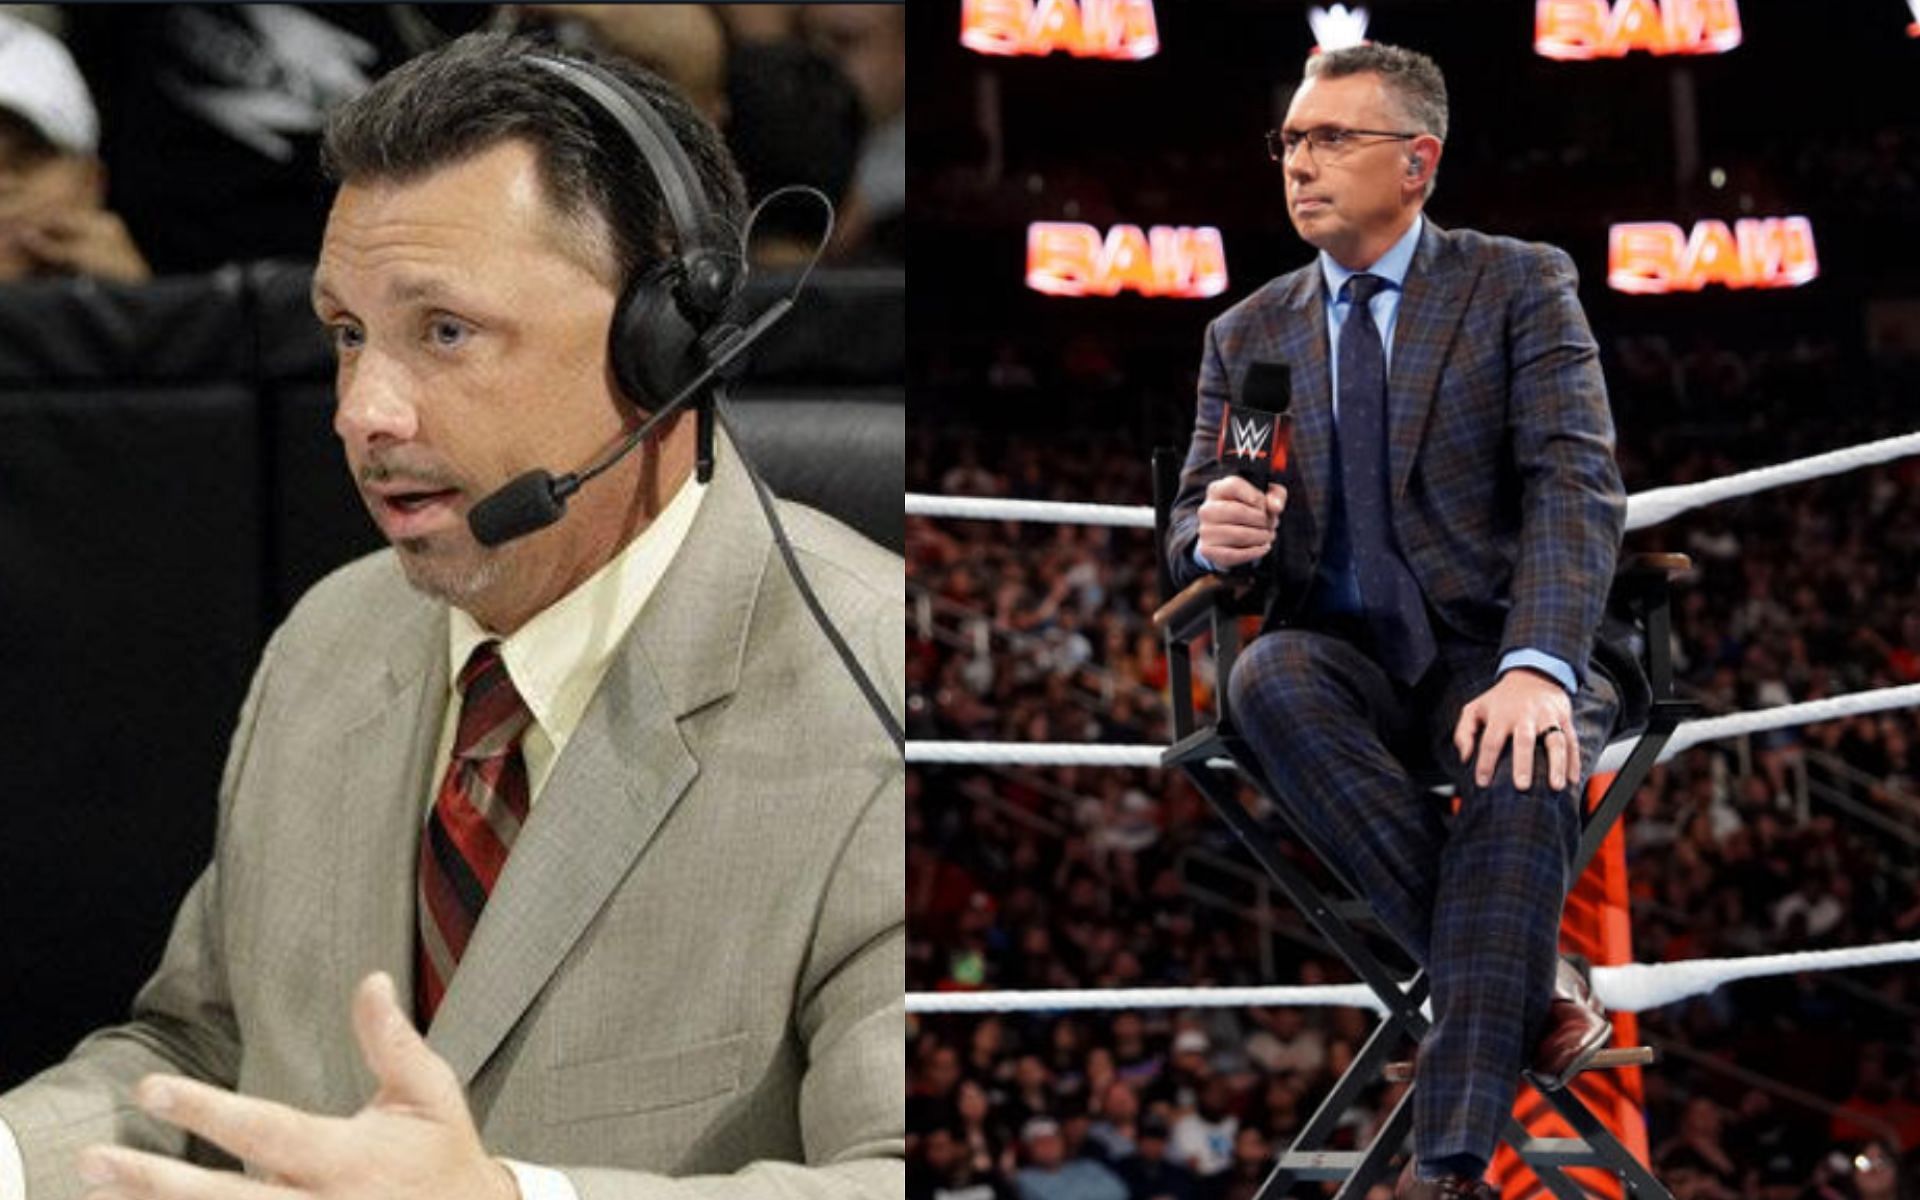 Michael Cole has had an illustrious nearly three decade long run with WWE (Image source: WWE)